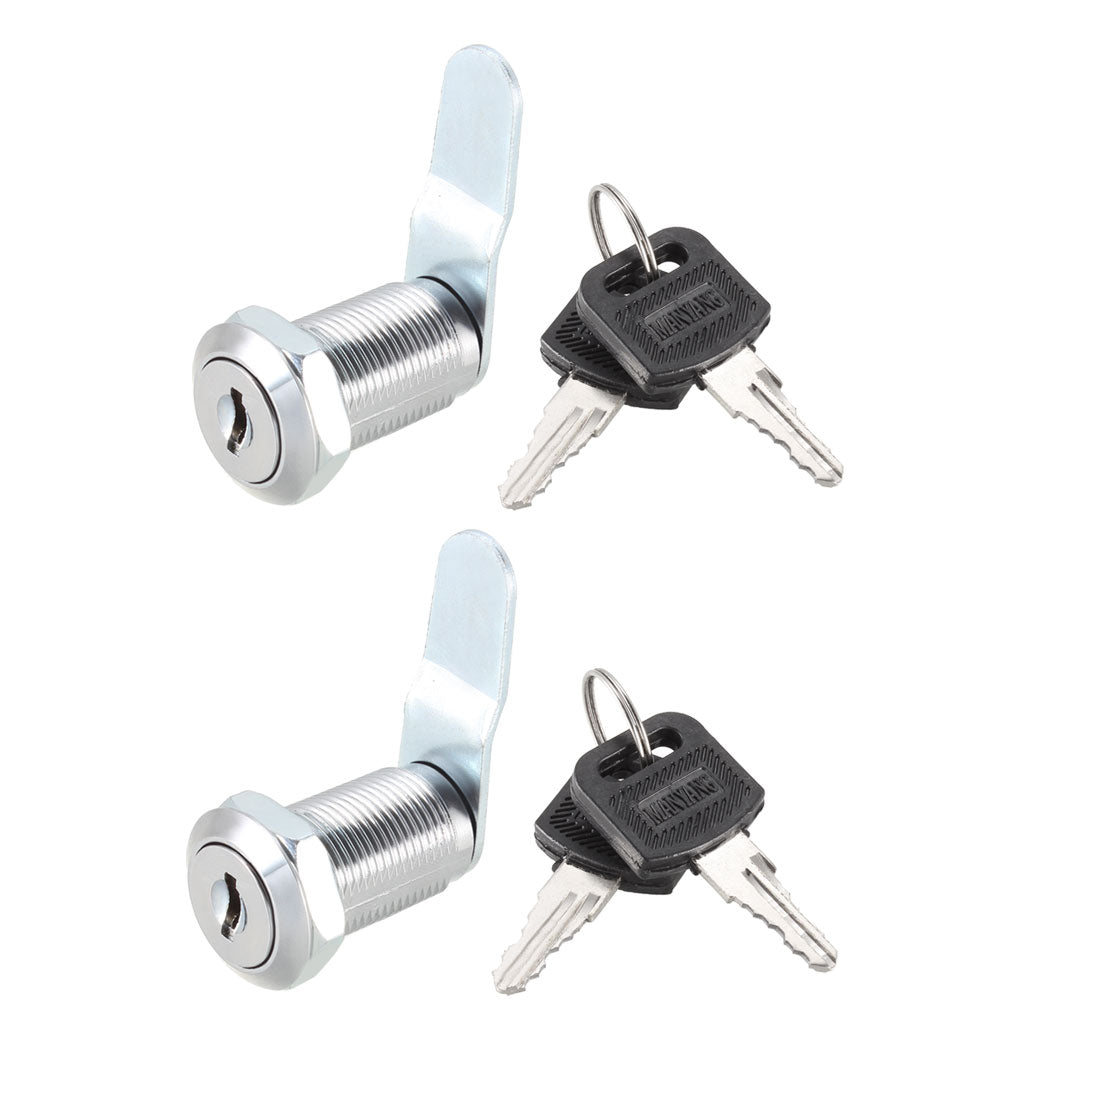 uxcell Uxcell Cam Lock 25mm Cylinder Length Fit on Max 5/8-inch Panel Keyed Different 2Pcs